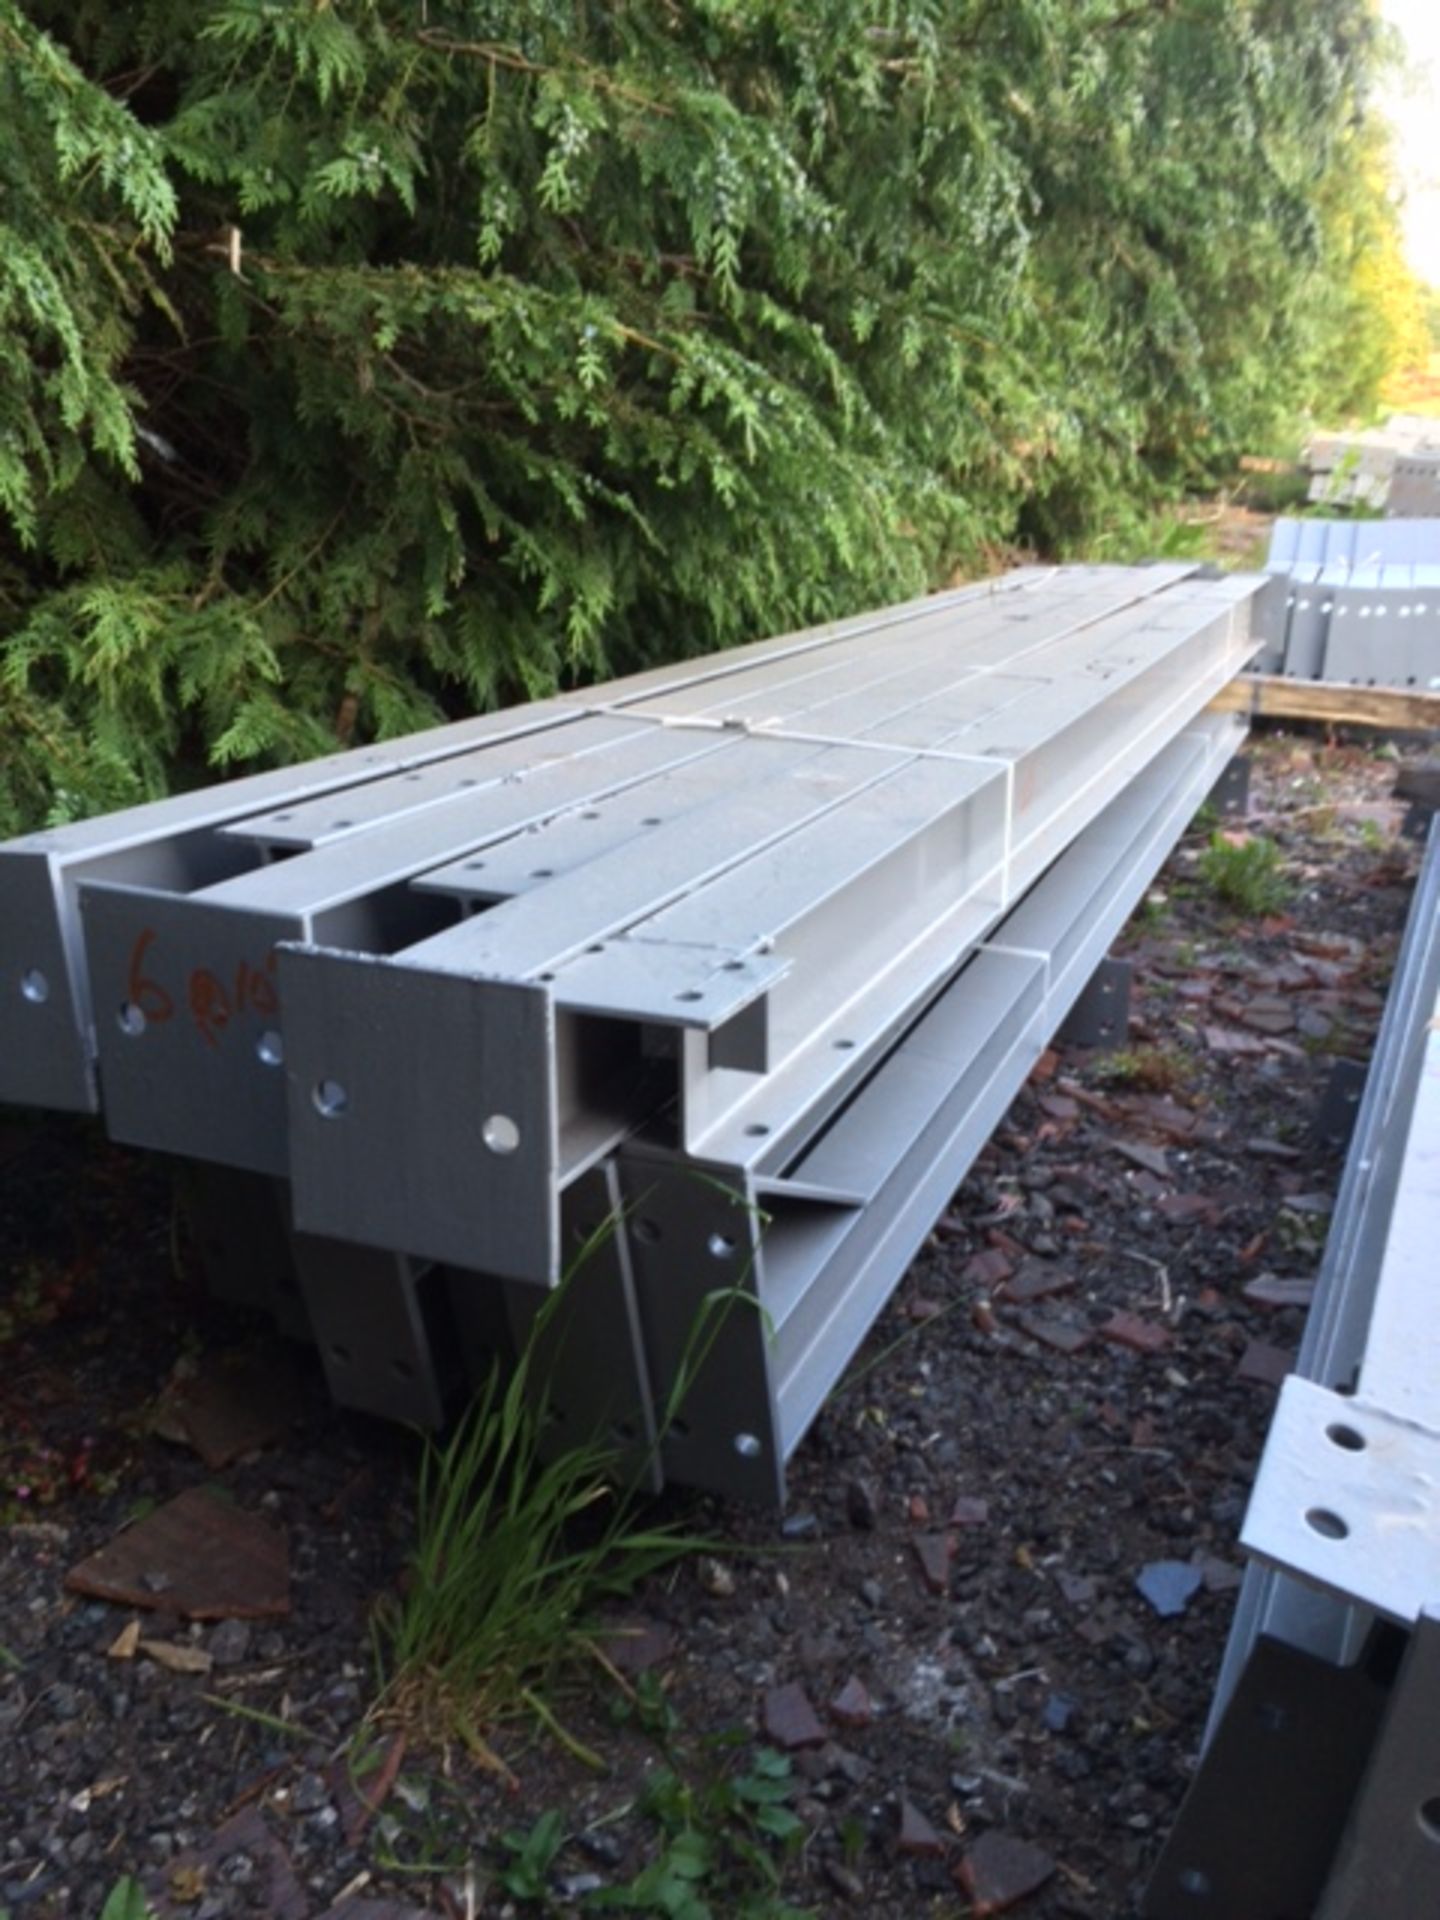 Apex Steel Framework, with Purlins and Fixings. 30ft long x 20ft wide x 10ft @ eaves.